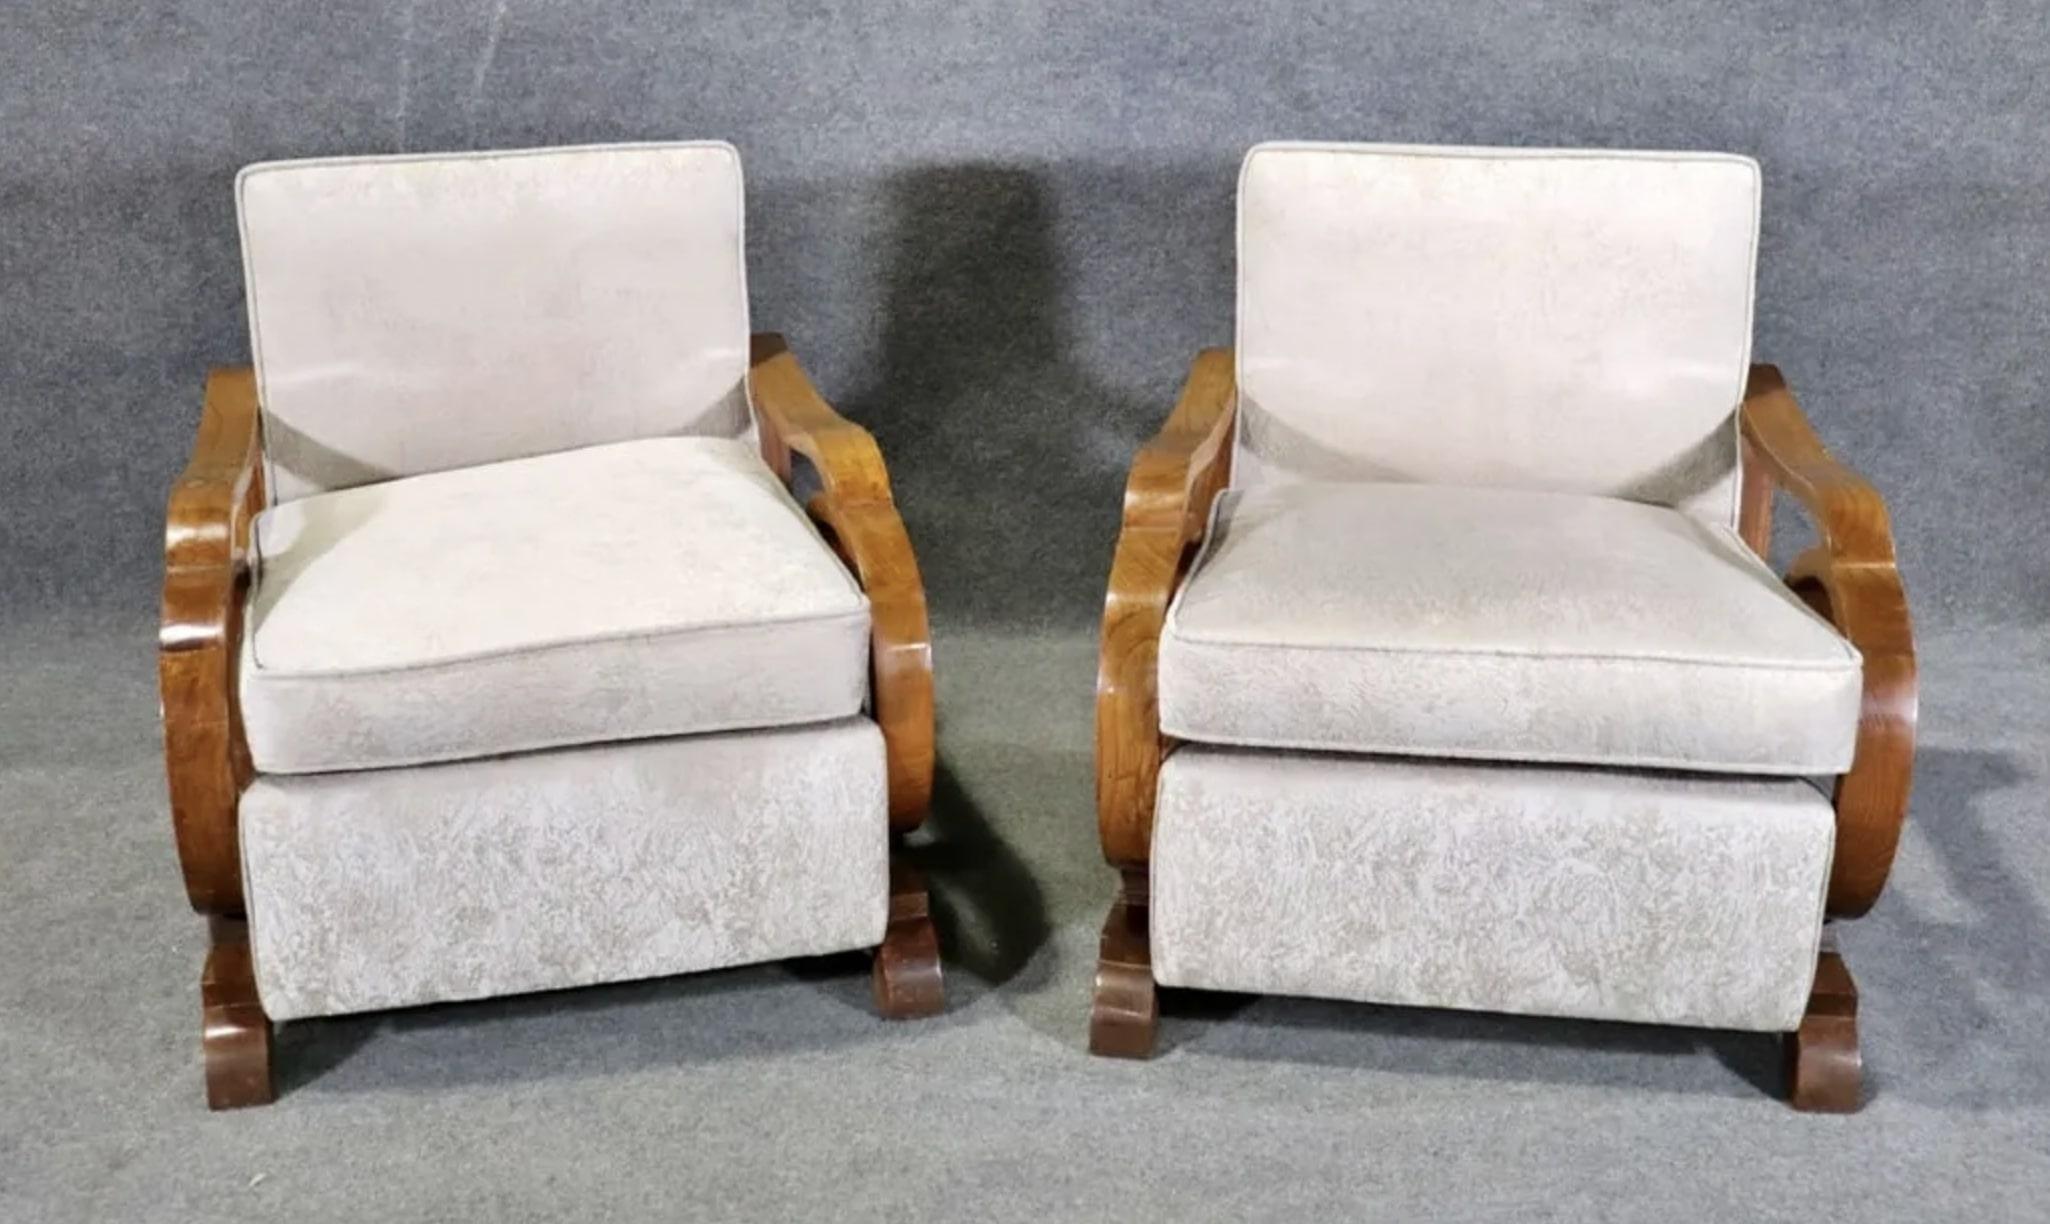 Pair of wide lounge chairs with dramatic wood arms. Art Deco style frame and soft cushioned seat and back.
Please confirm location NY or NJ